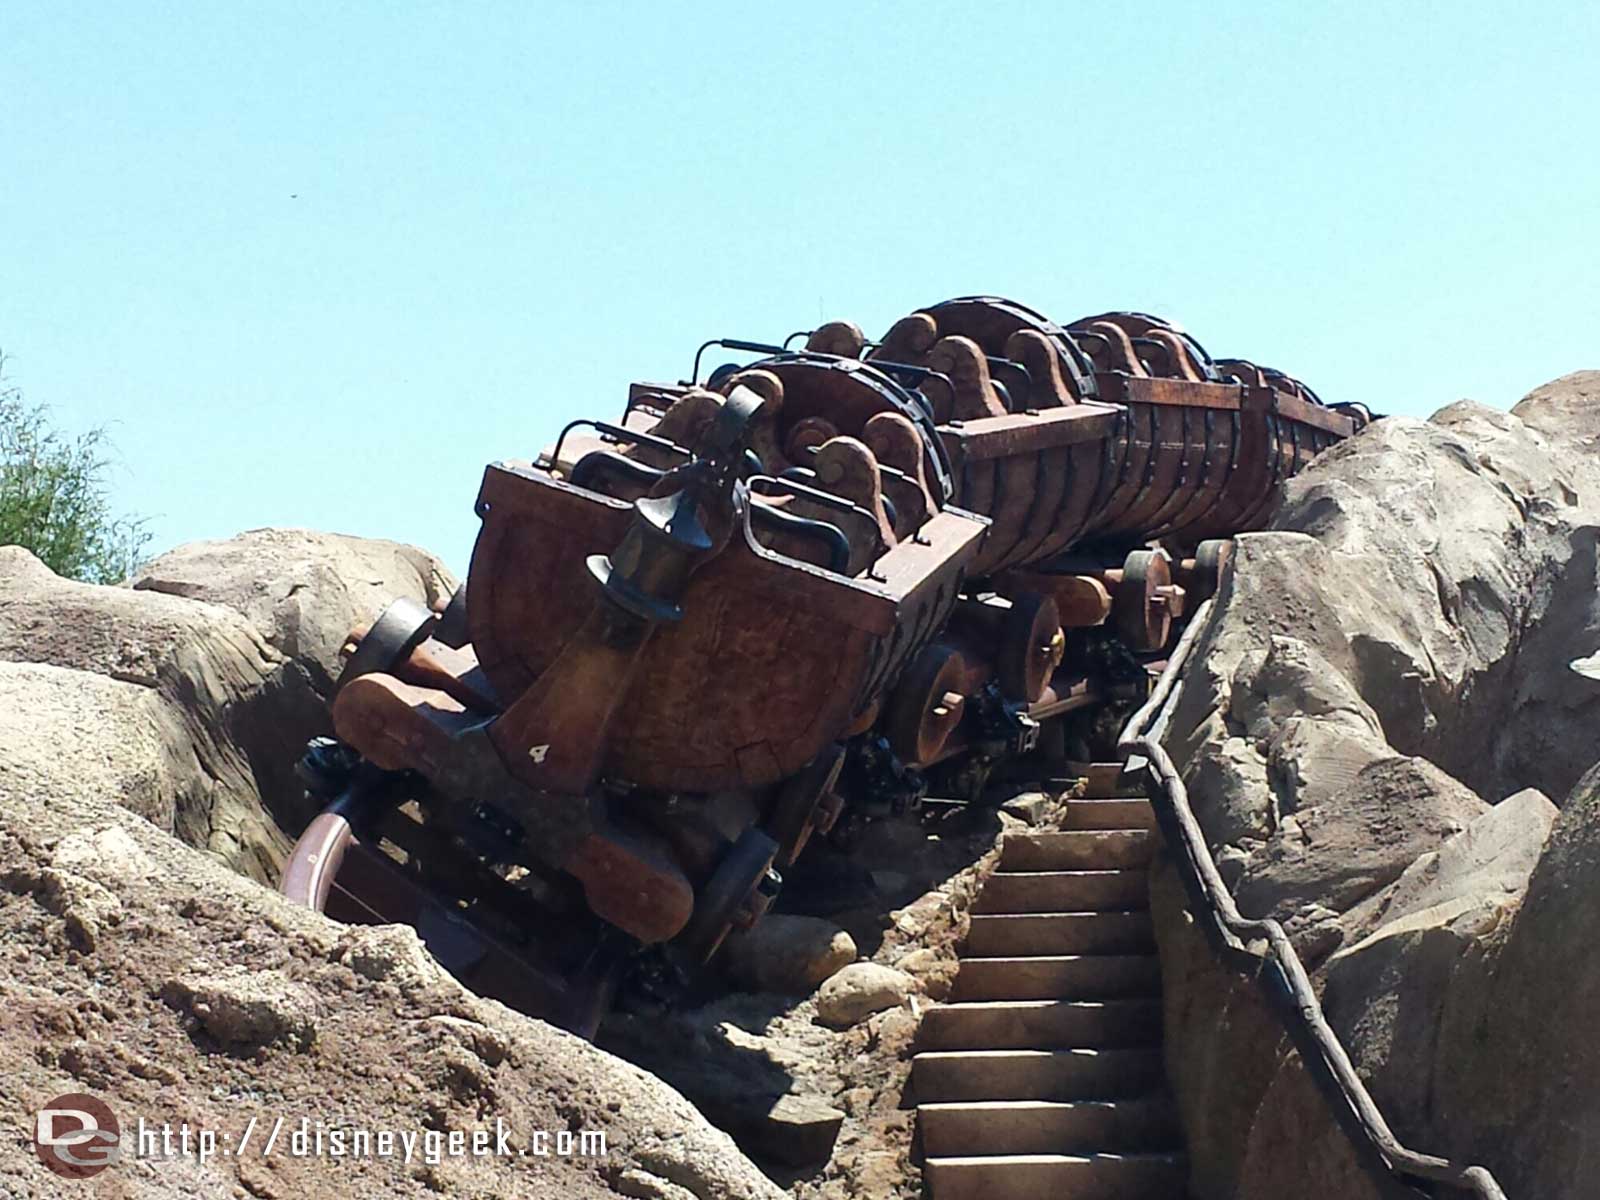 The Seven Dwarfs Mine Train opens May 28th. Today they were cycling some empty trains